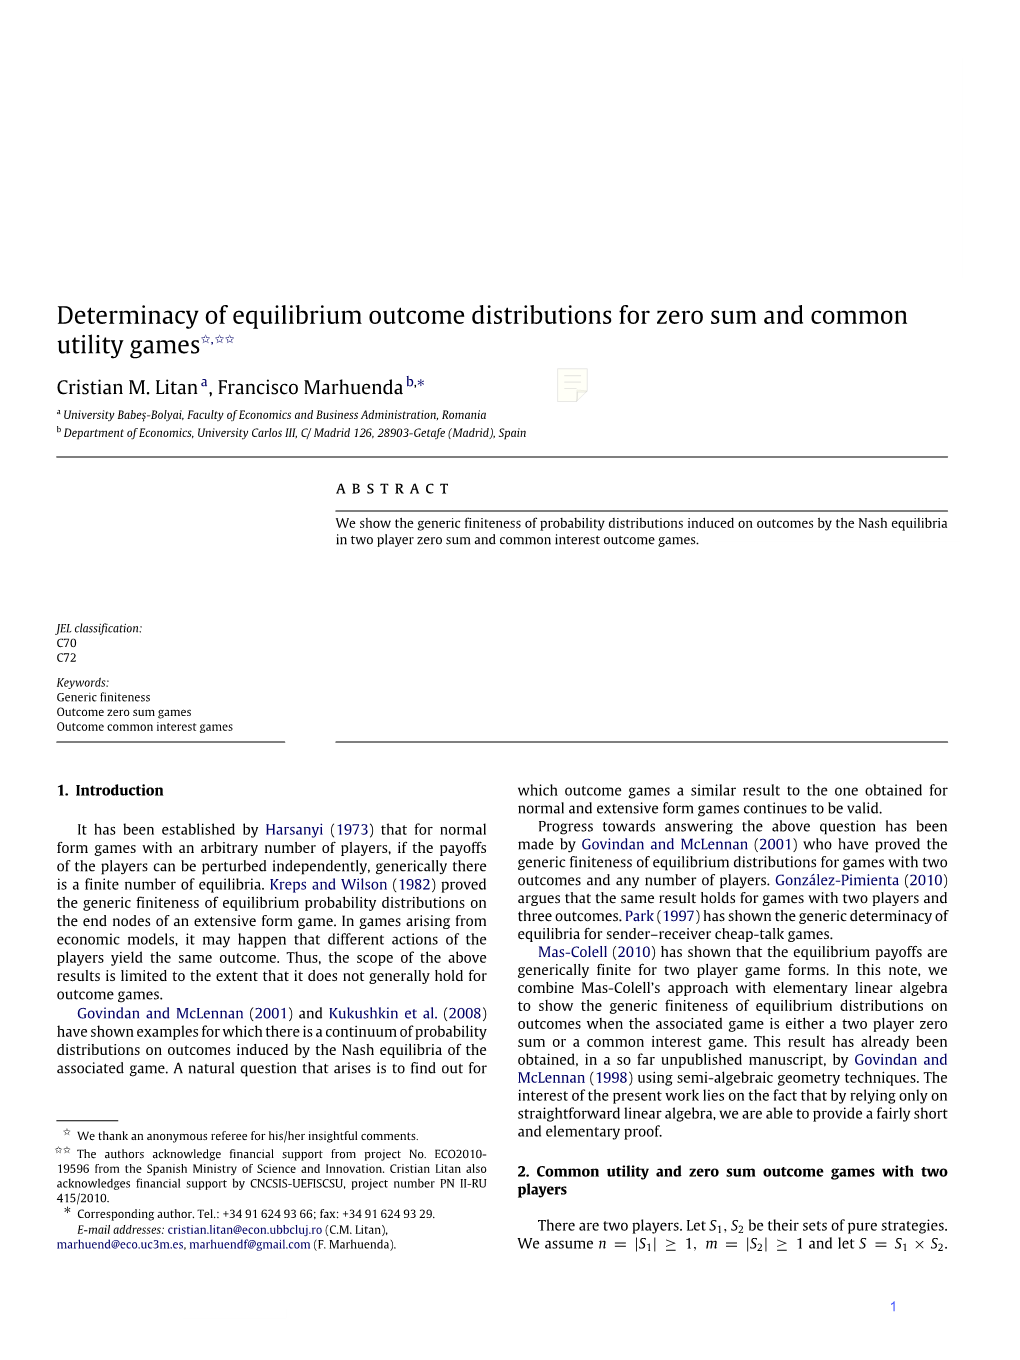 Determinacy of Equilibrium Outcome Distributions for Zero Sum and Common Utility Games✩,✩✩